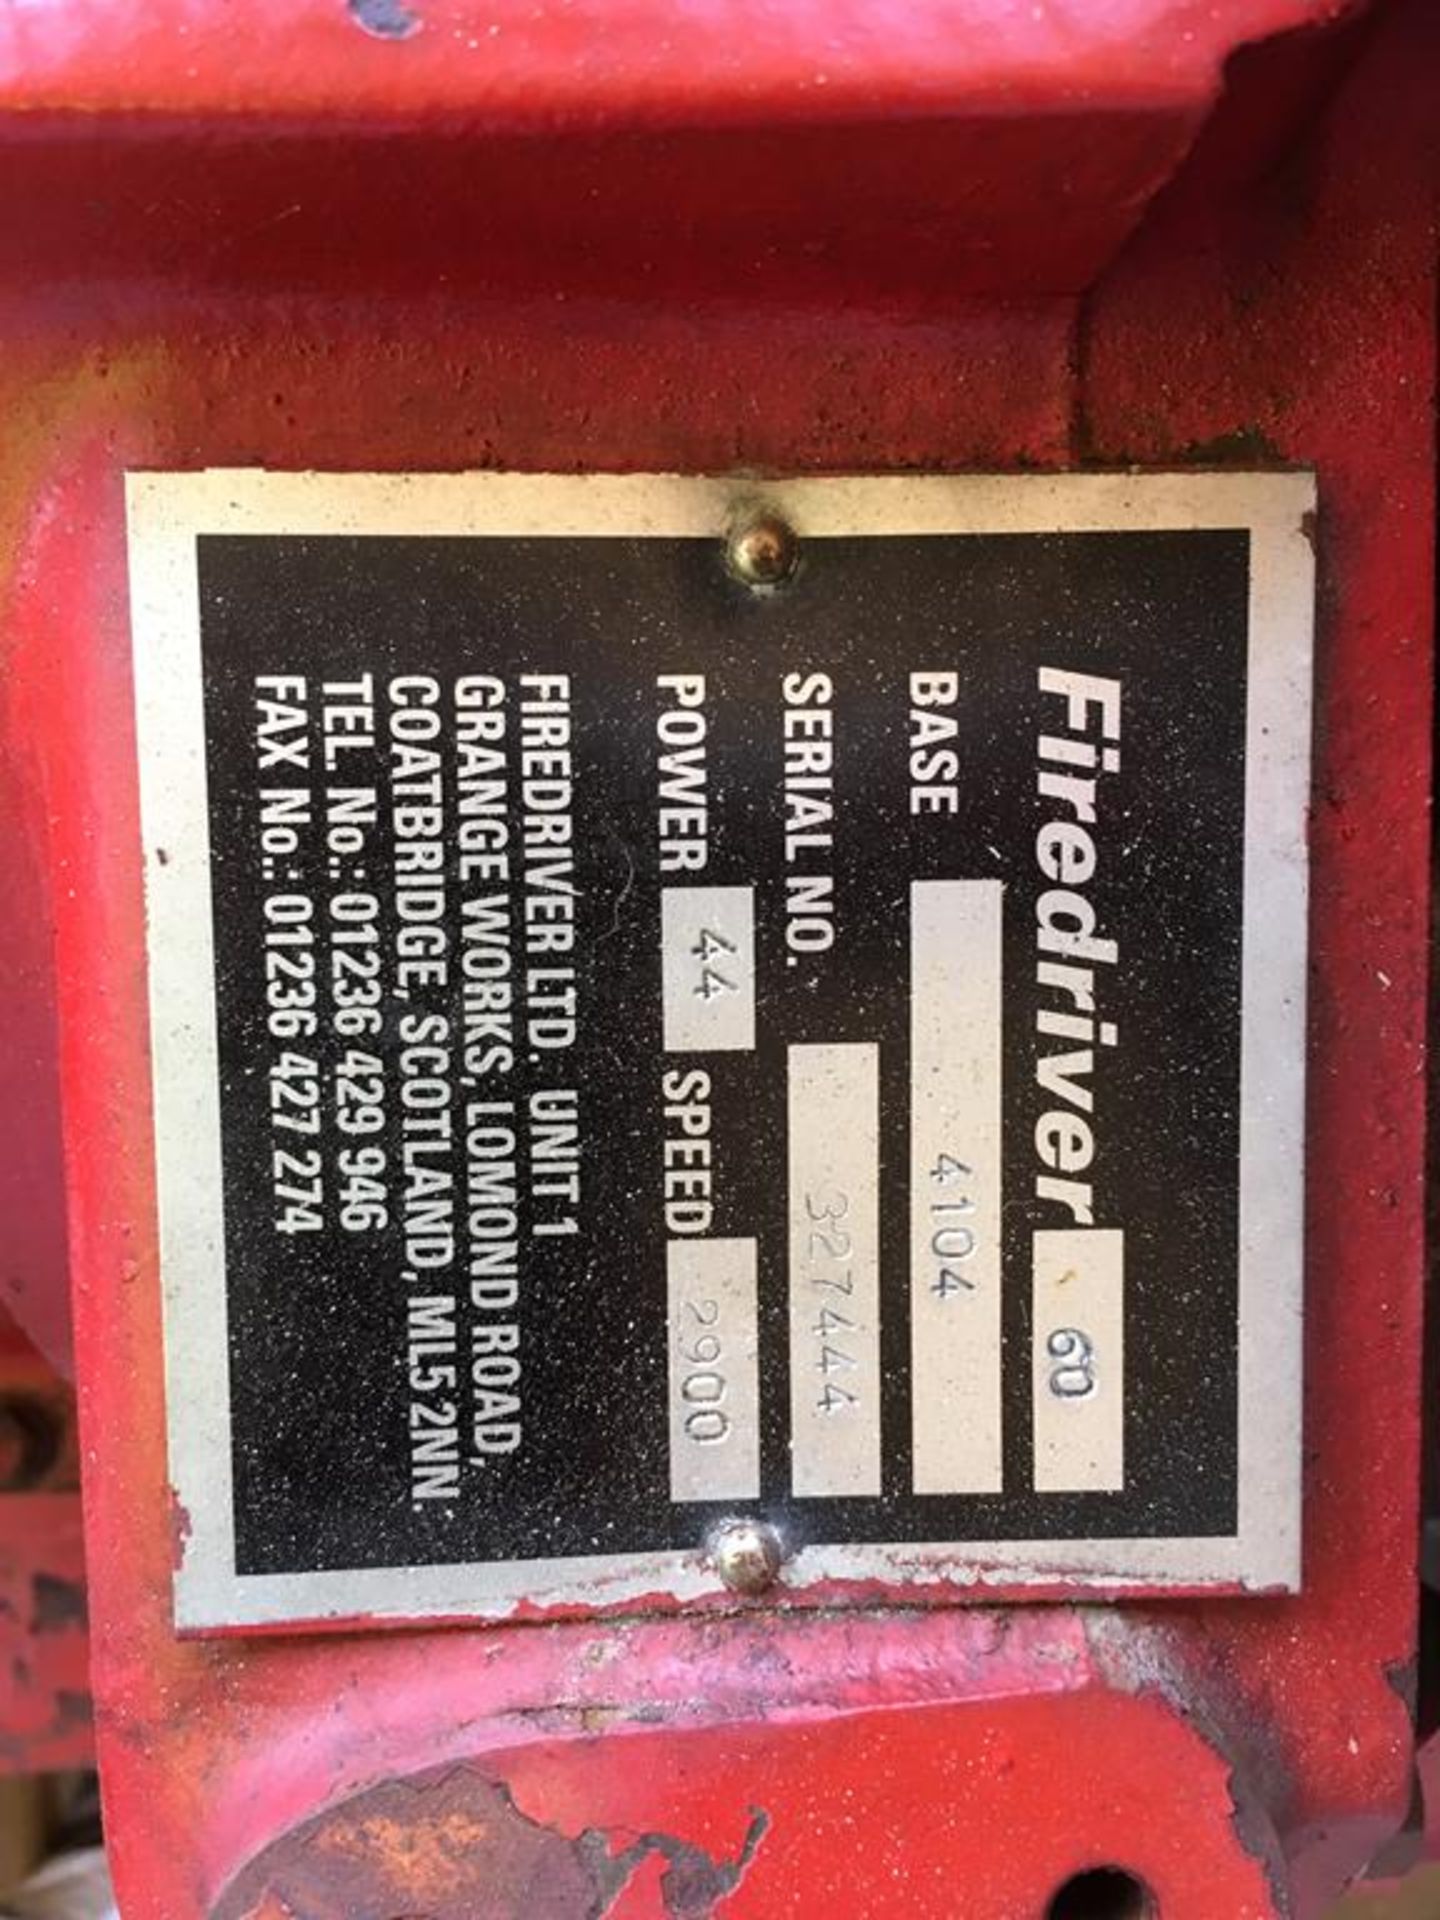 * Iveco 44hp Firedriver 60 Skid mounted Fire Pump. A Fire Driver 60 Skid Mounted Diesel Fire Pump - Image 3 of 3